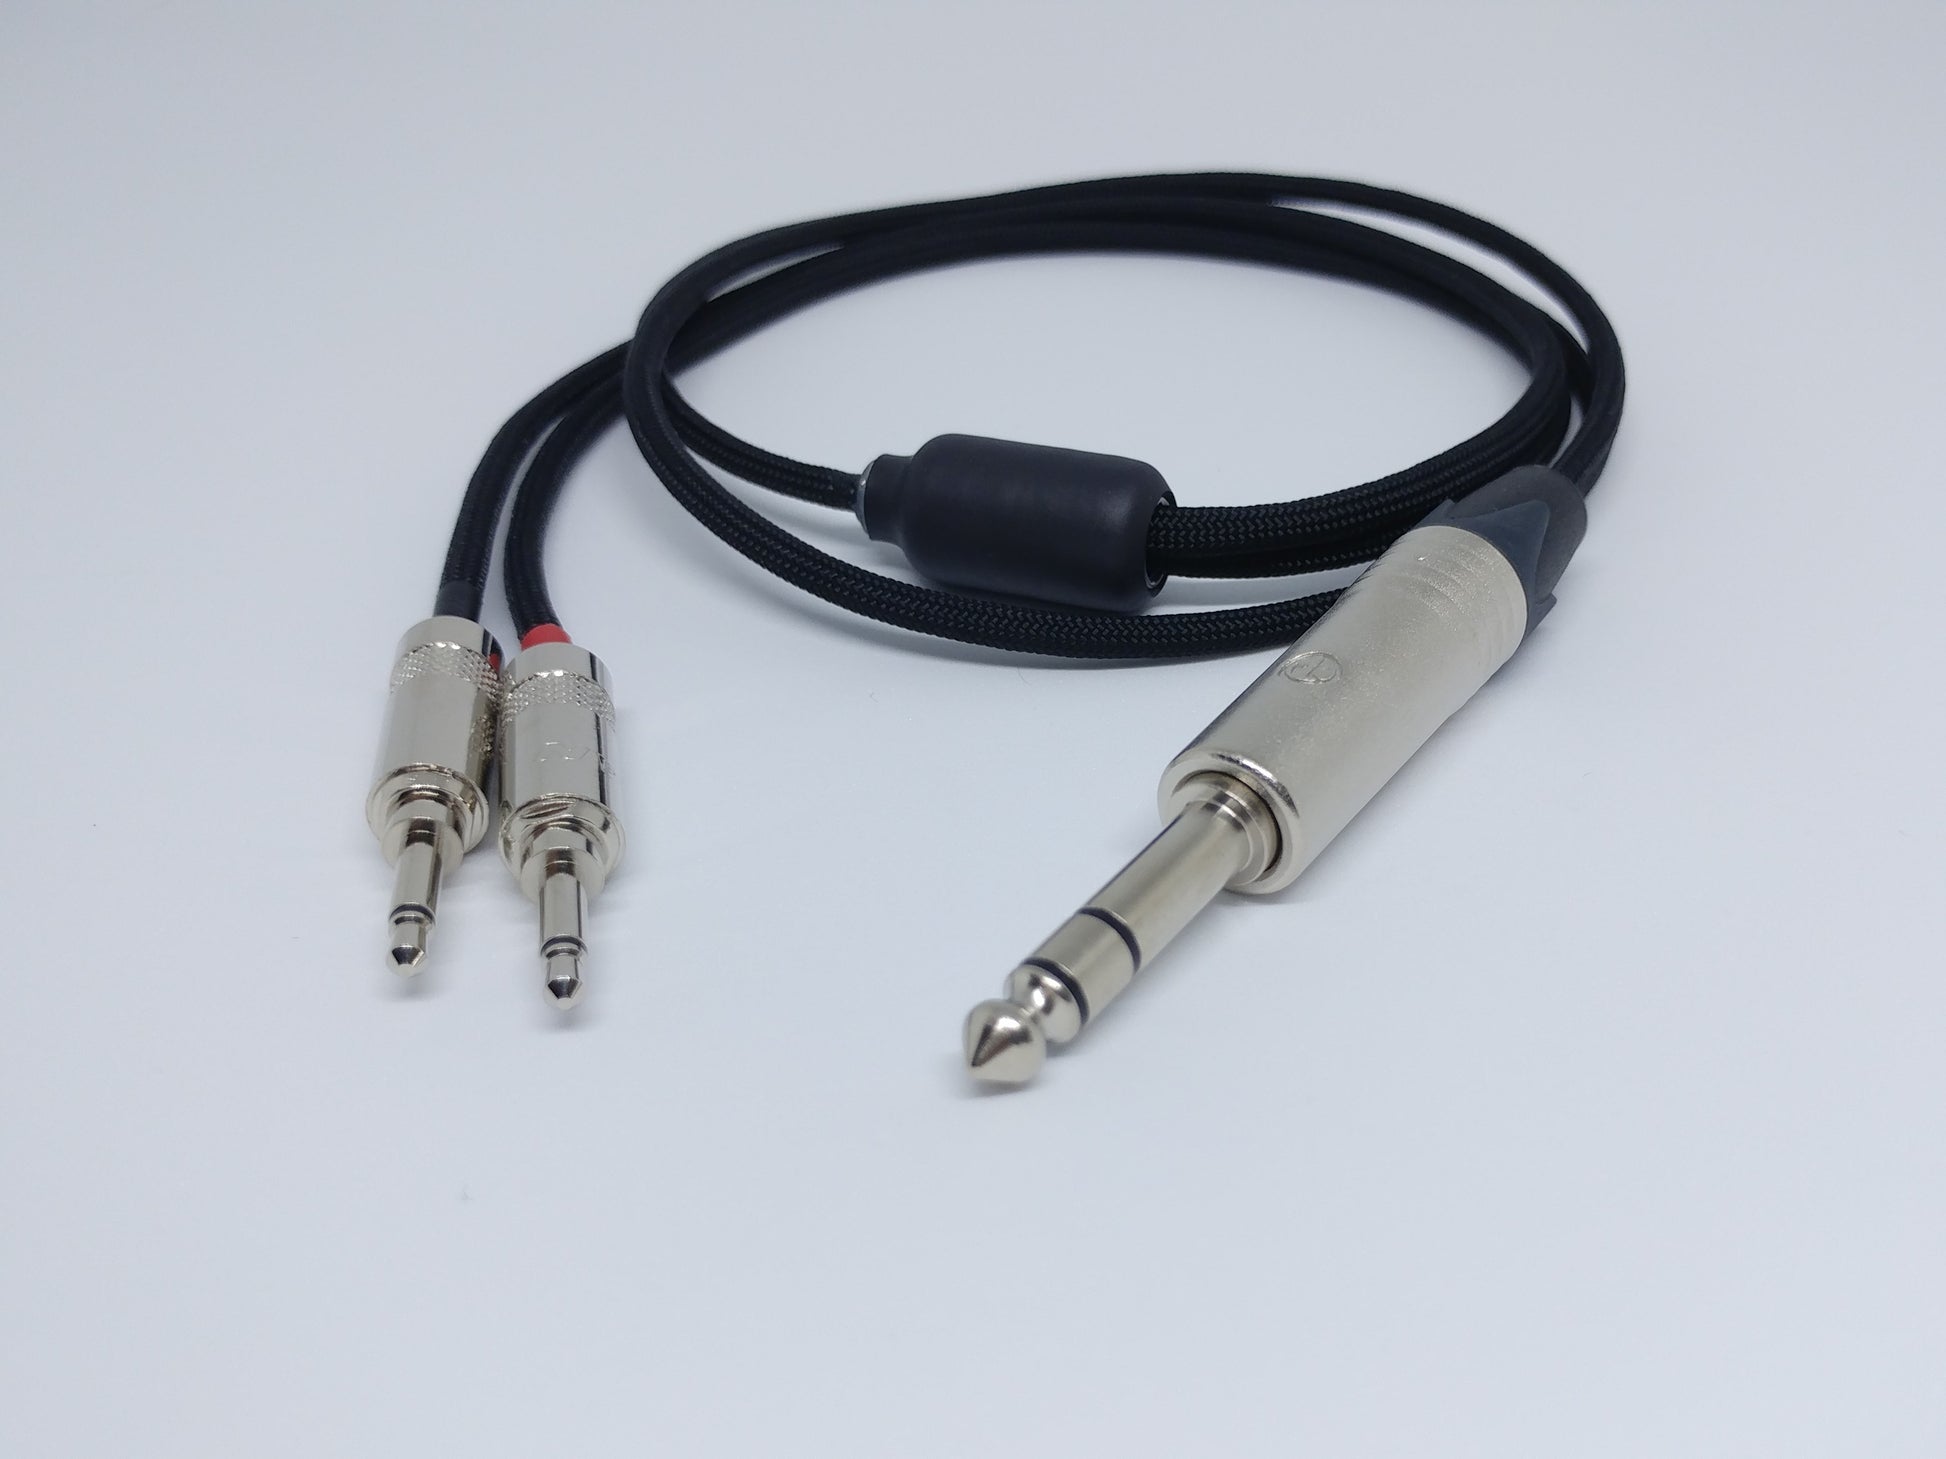 Dual 3.5mm headphone cable